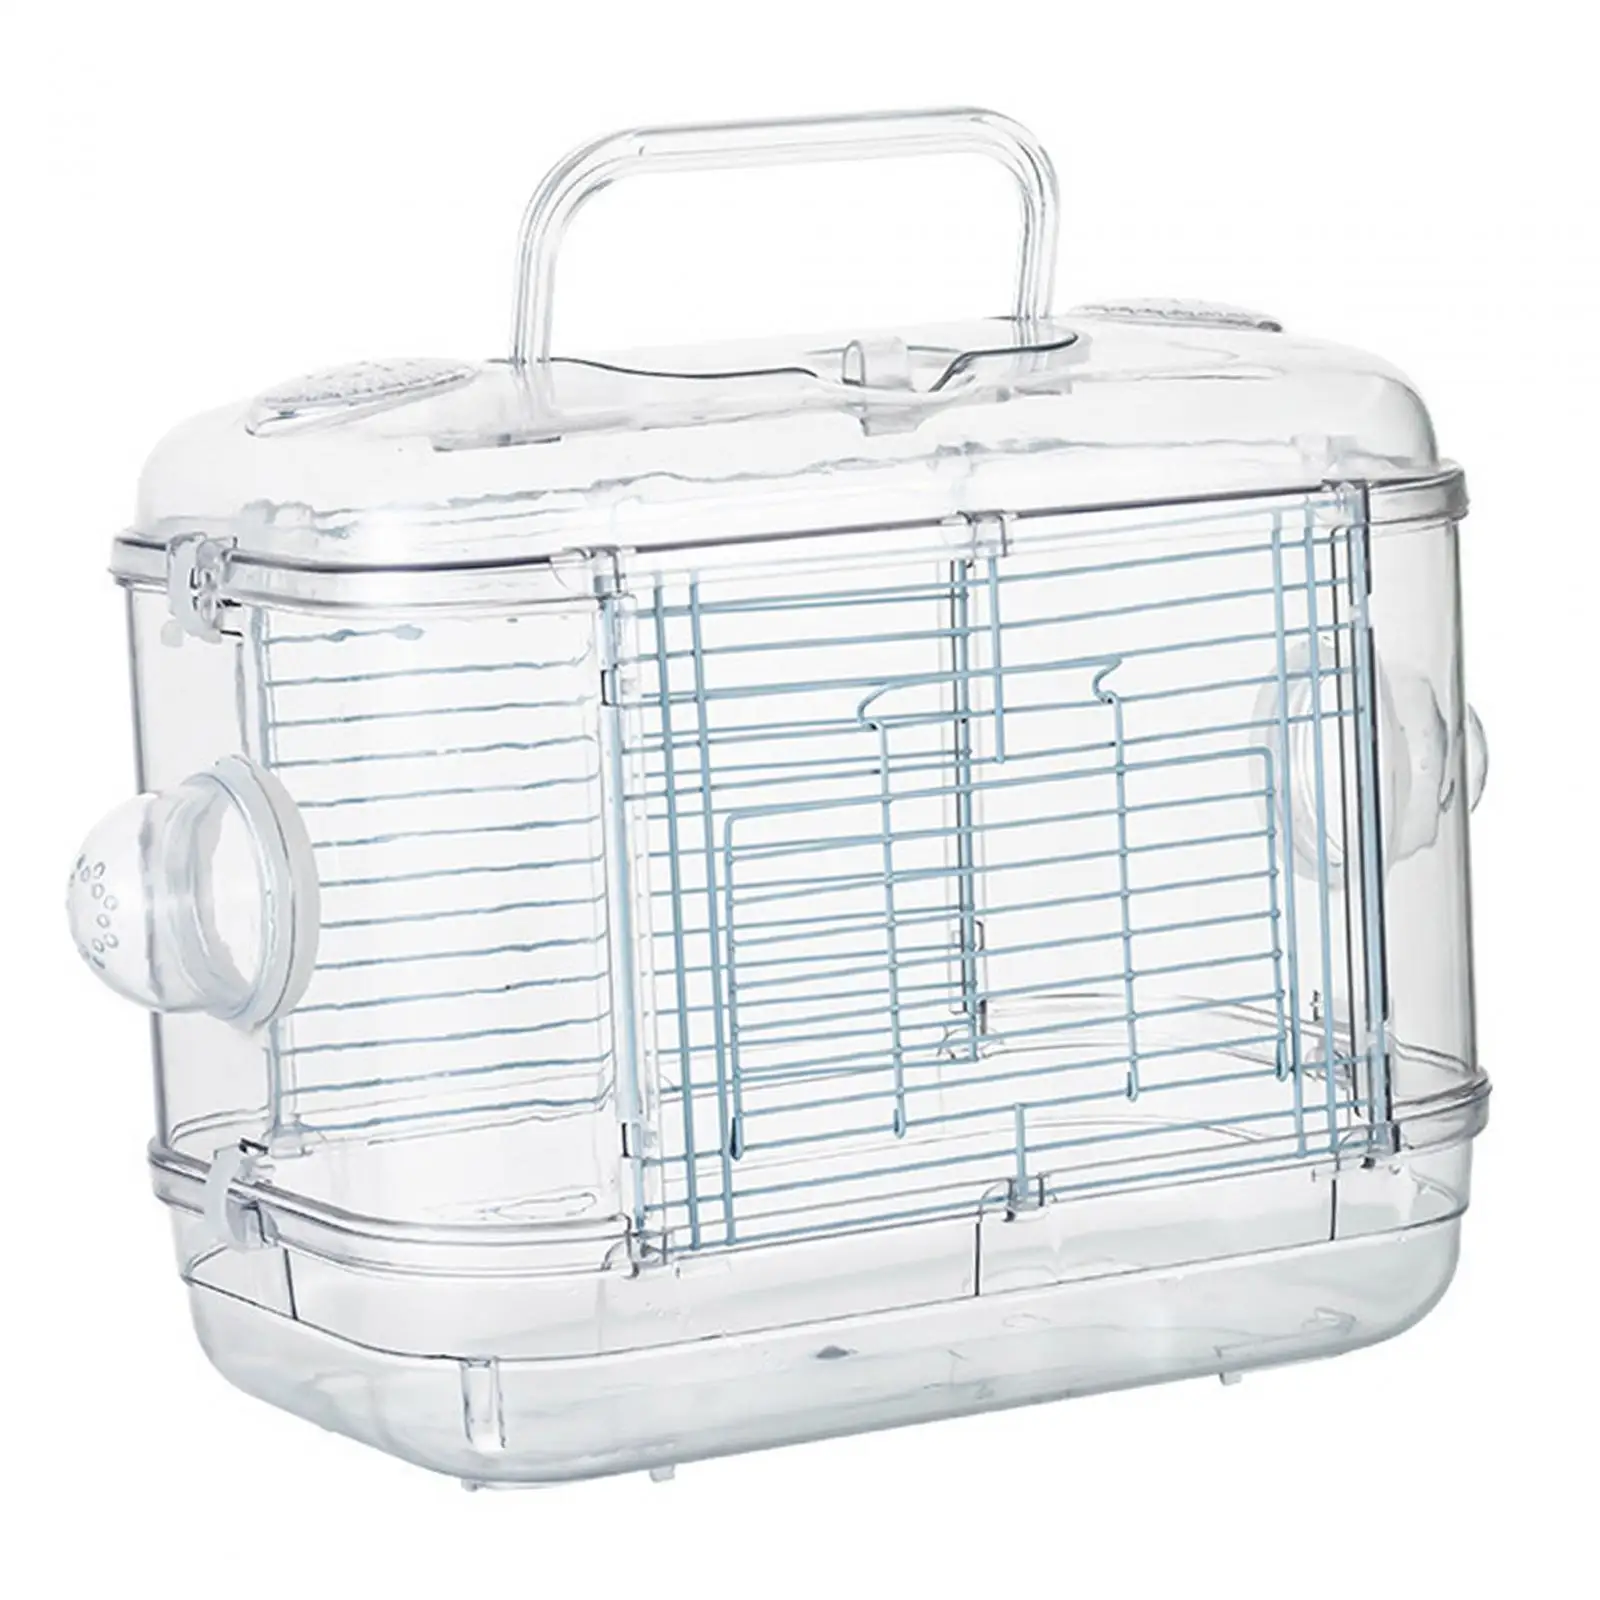 Hamster Cage with Stand Lightweight Bird Carrier for Birds Parrots Parakeets